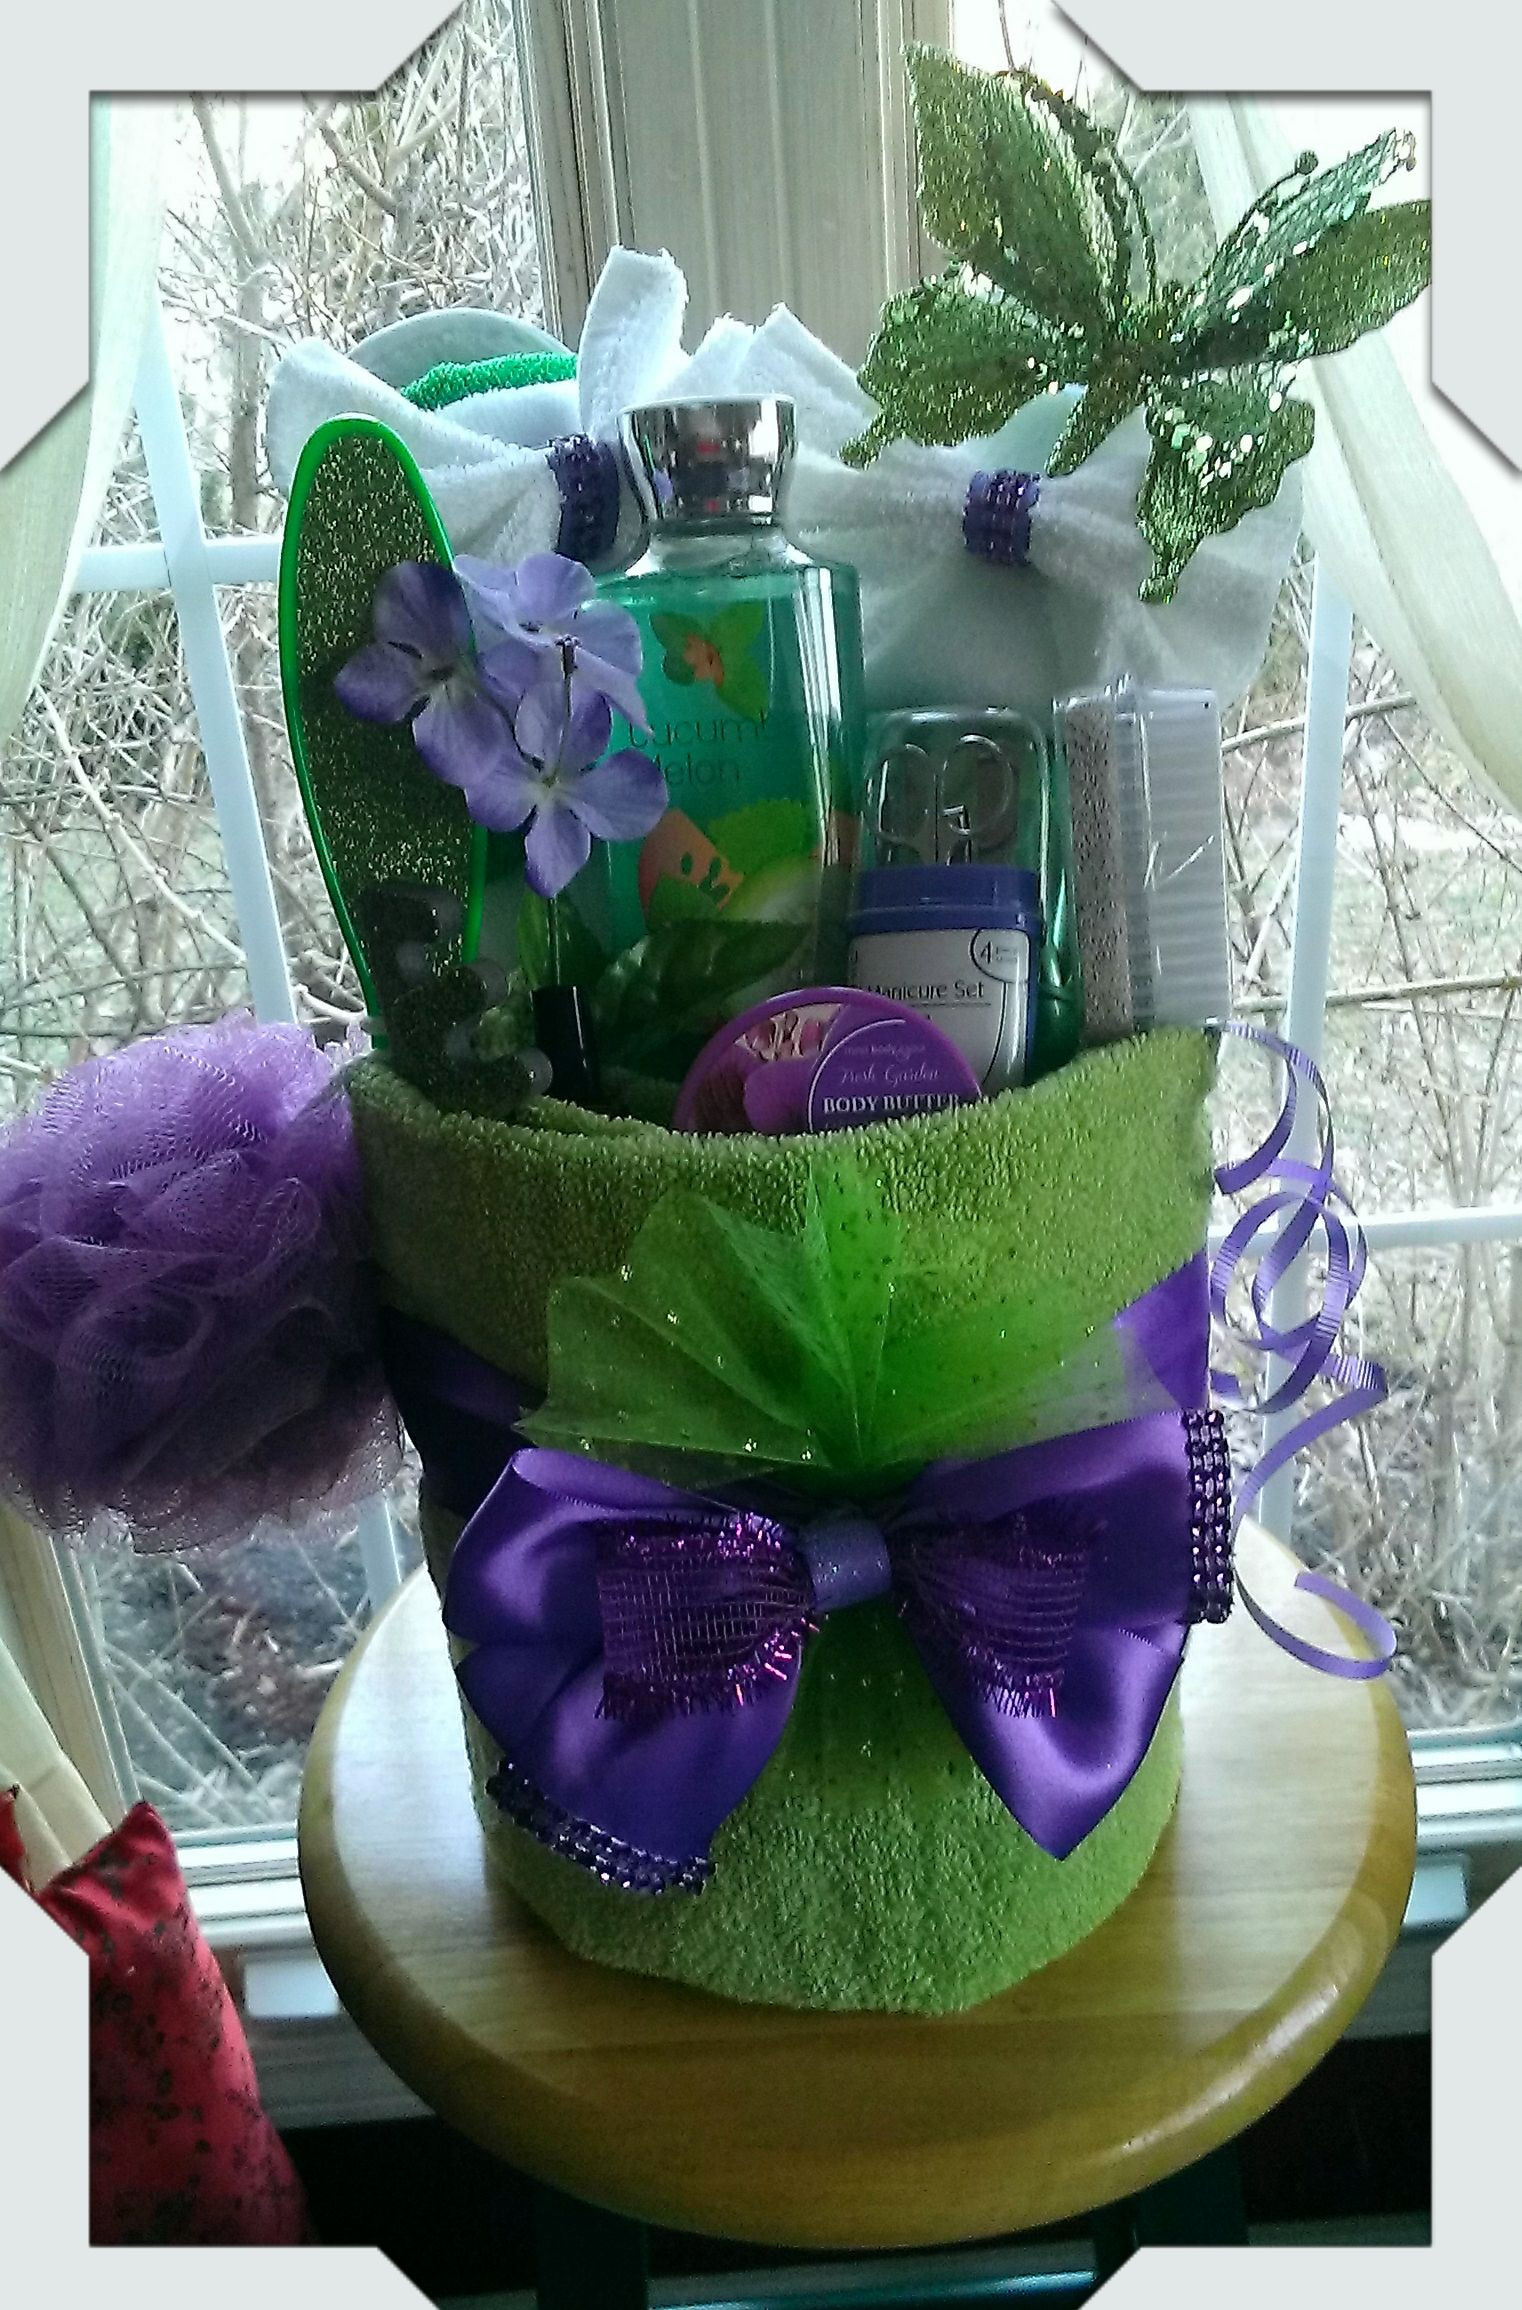 Spa Gift Basket Ideas Homemade
 Towel Spa Gift Basket made by Norma s Unique Gift Baskets